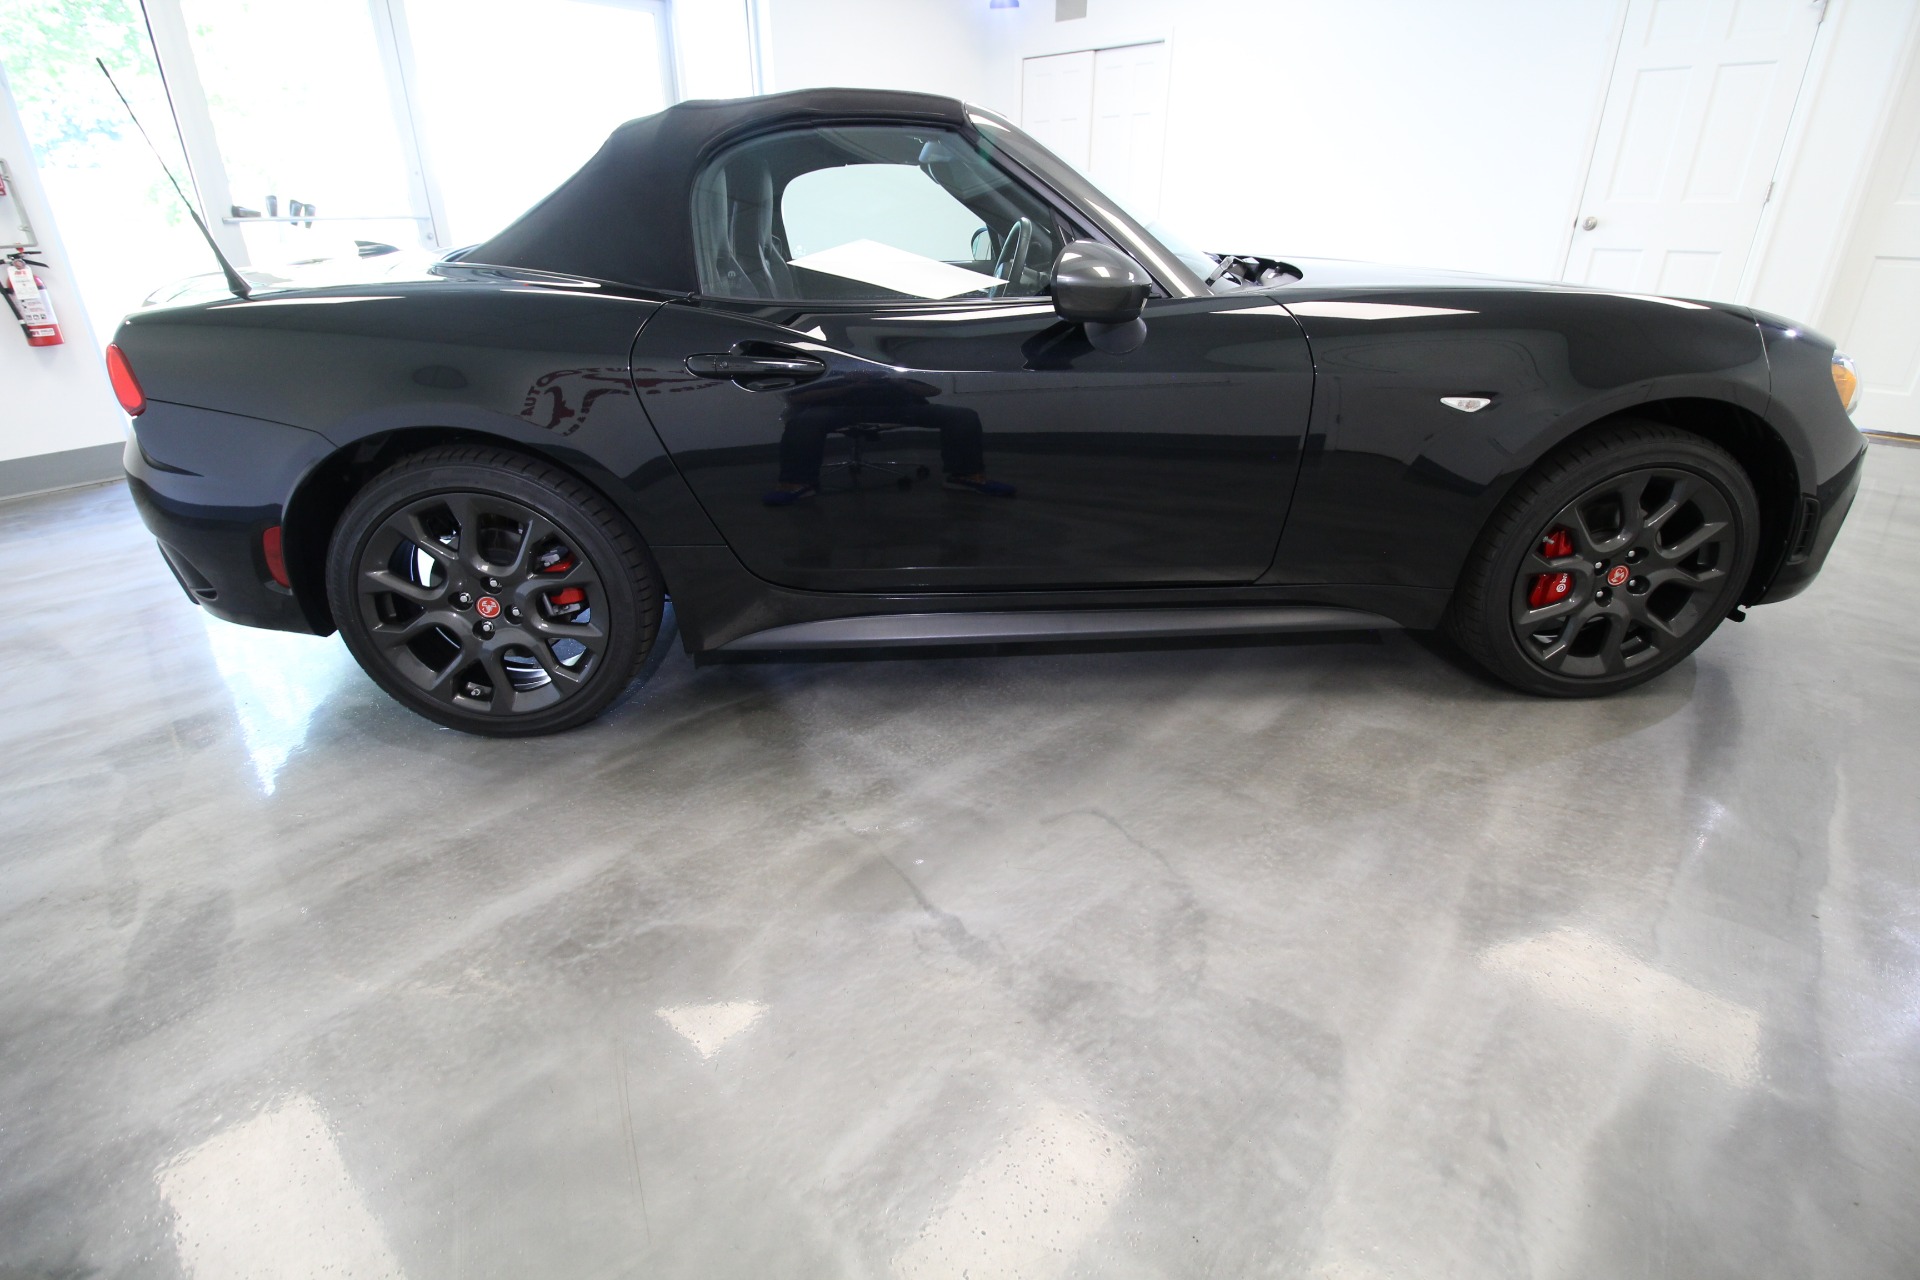 Used 2018 Nero Cinema Jet Black Fiat Spider 124 ABARTH Clean LOW MILAGE Abarth Convertible | Albany, NY